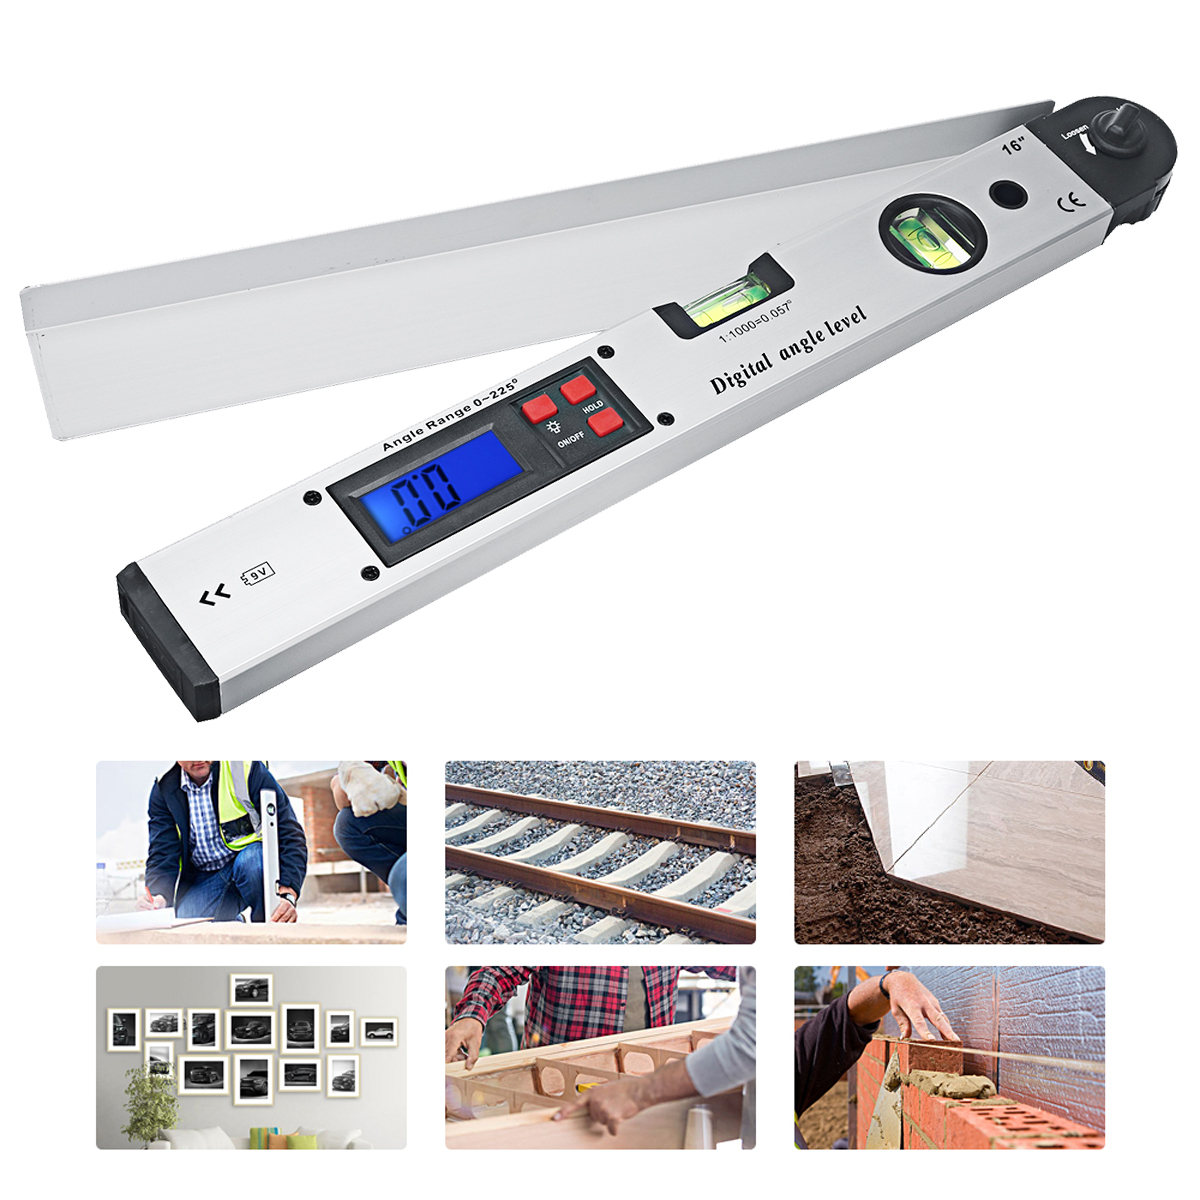 250400mm-Digital-Angle-Level-Meter-LCD-Display-0-225-Degree-for-Measuring-Roof-Angles-Fitting-Up-Win-1740234-7